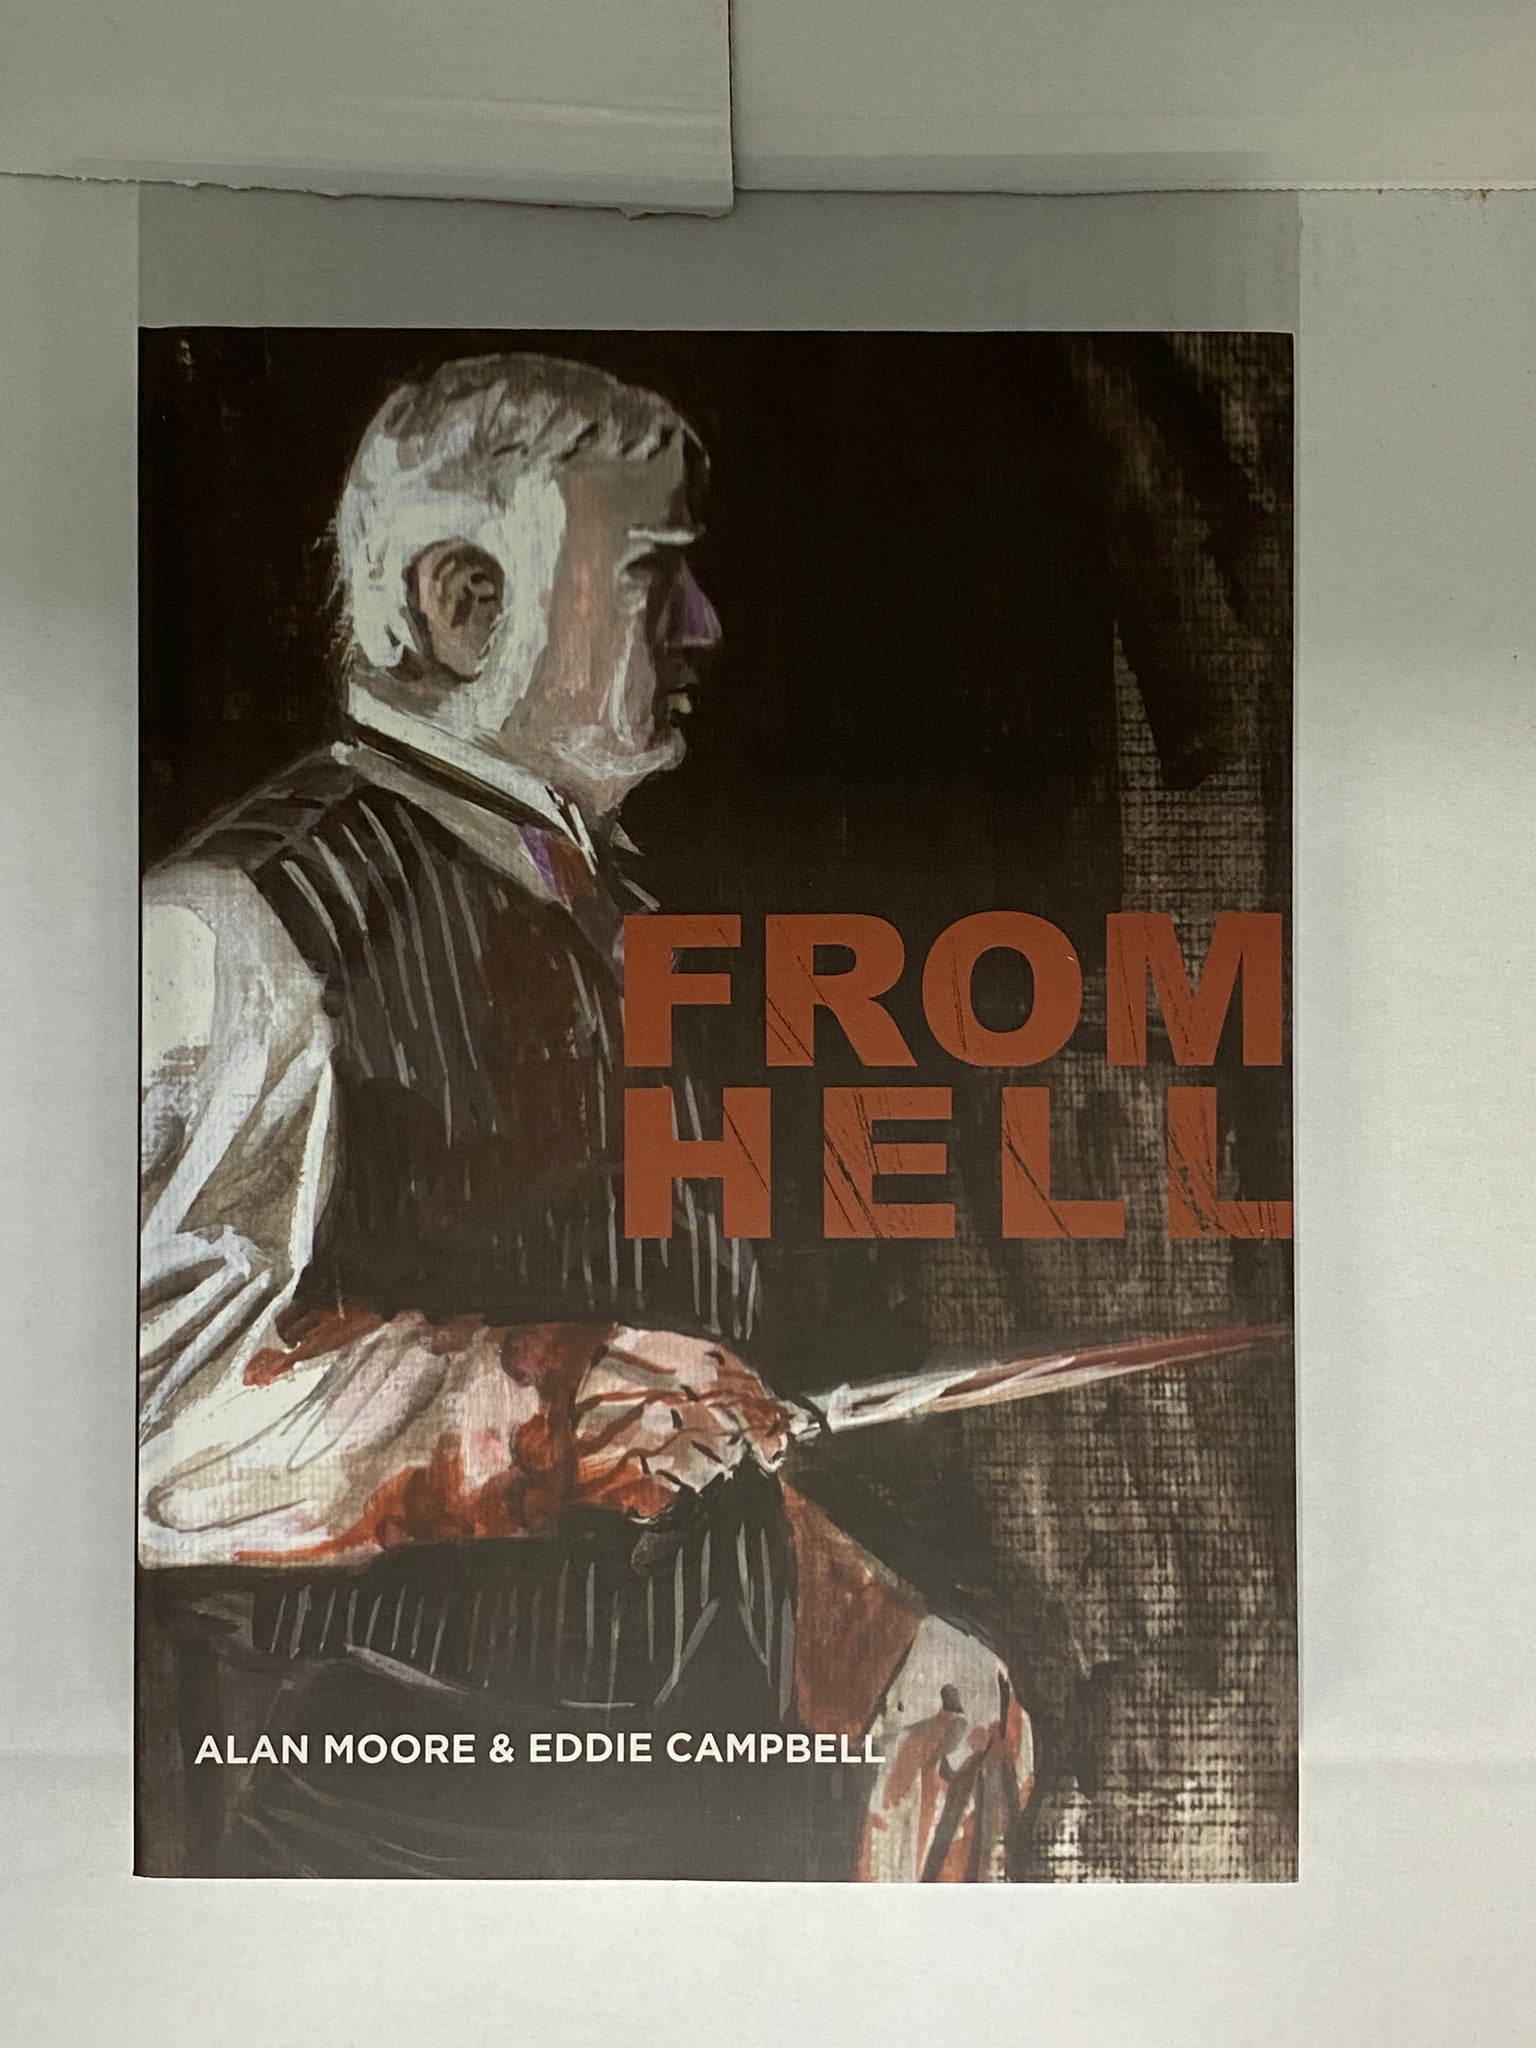 FROM HELL & FROM HELL COMPANION TRADE PAPERBACK SLIPCASE EDITION BOX SET - NEW OPENED STOCK